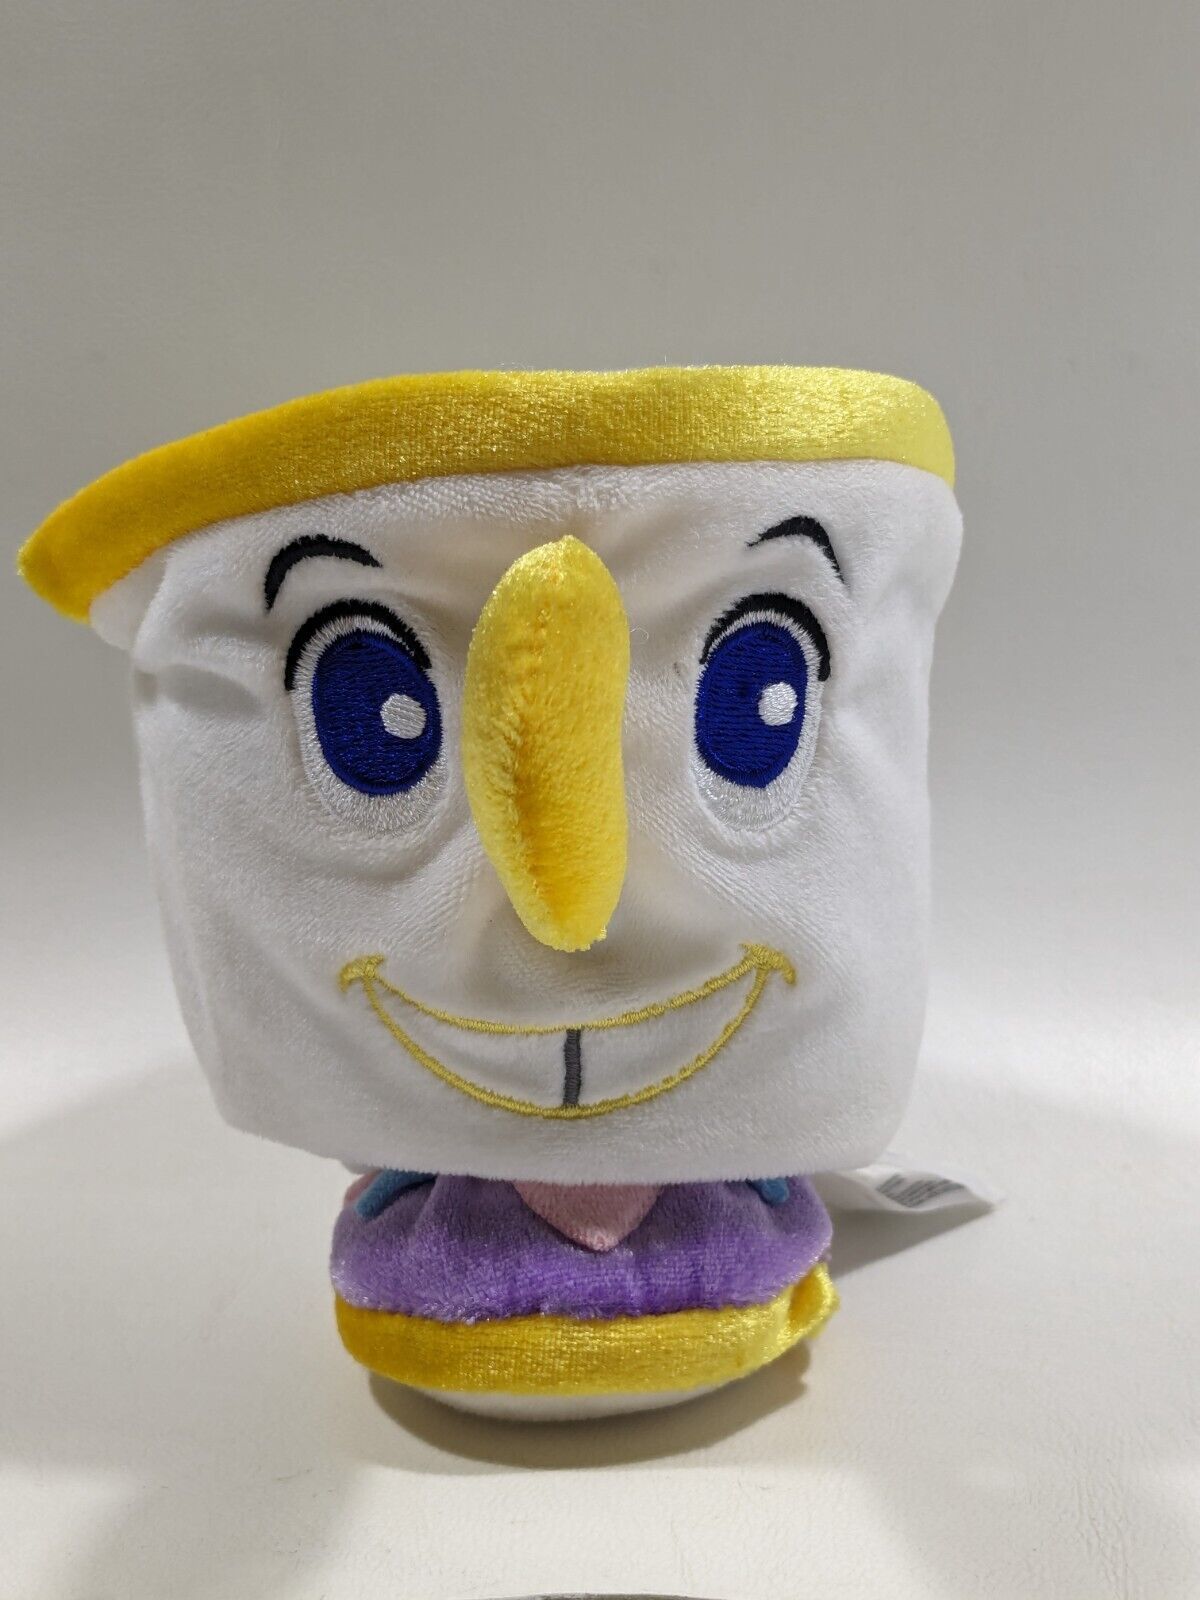 Primary image for Disney Store Beauty and the Beast - Chip the Teacup Plush 5 Inches Tall